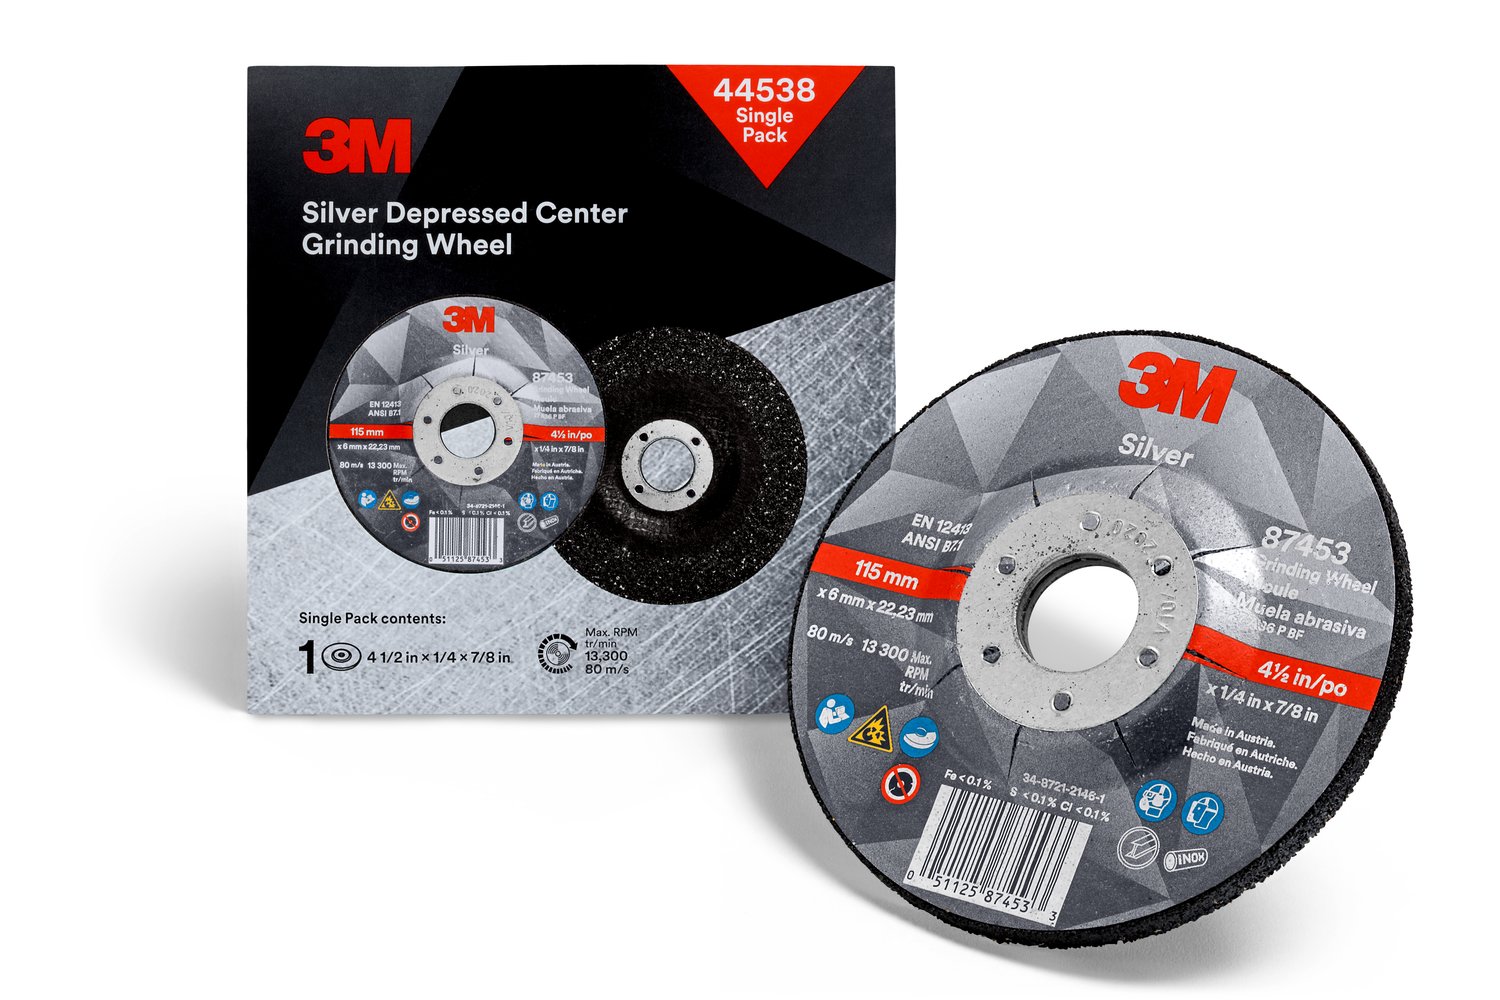 7100176081 - 3M Silver Depressed Center Grinding Wheel Single Pack, T27 4.5 in x 1/4
in x 7/8 in, Point of Purchase Display, 14/Pac, 1 ea/Case